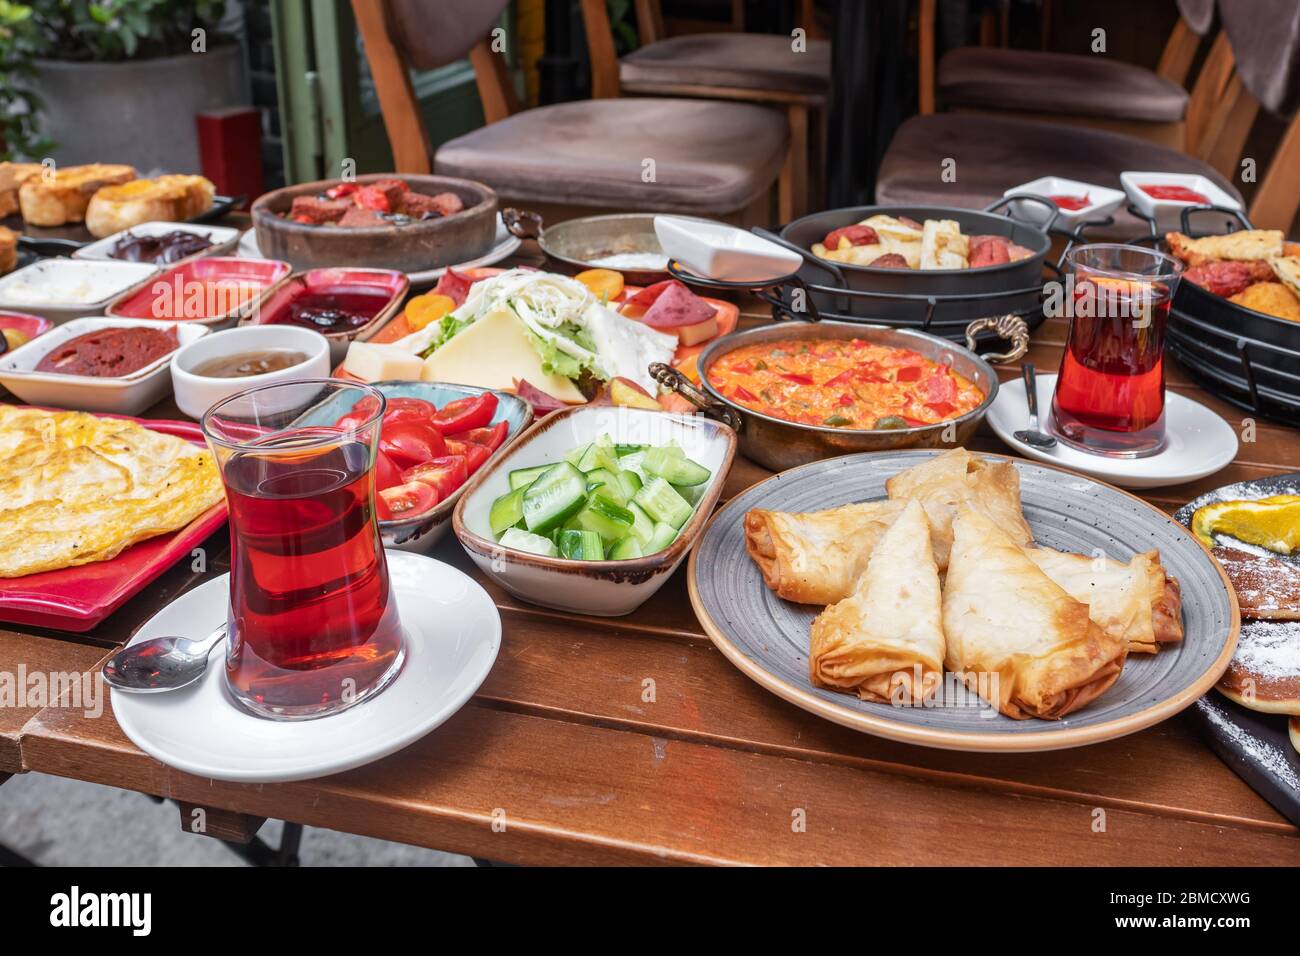 Delicious traditional turkish breakfast on the table Stock Photo